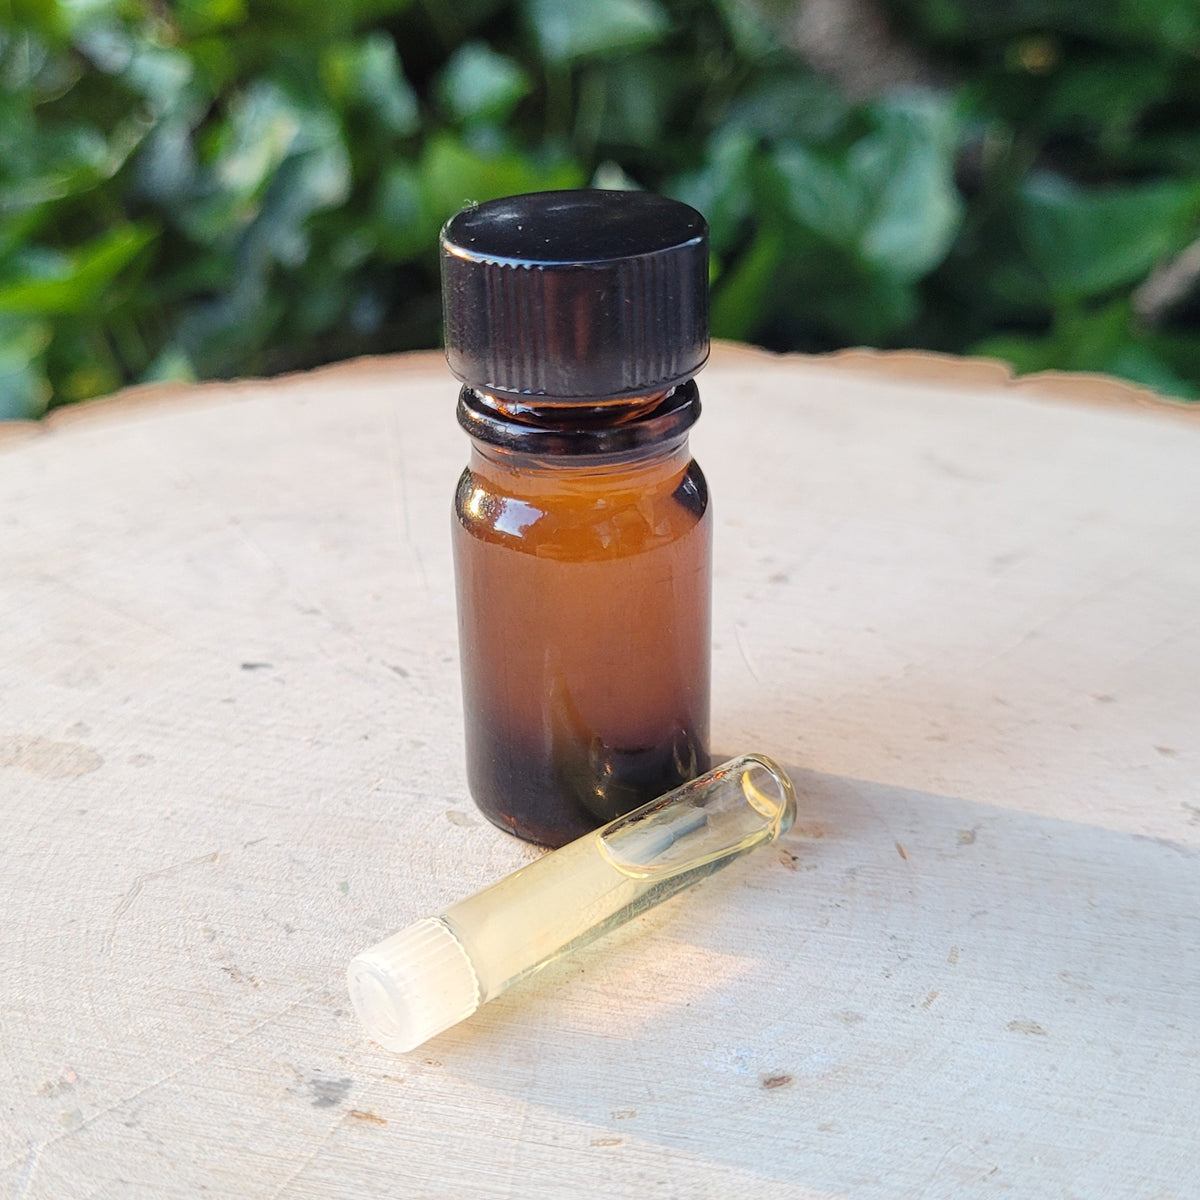 The Garden Of Earthly Delights Perfume Oil – Haus of Gloi